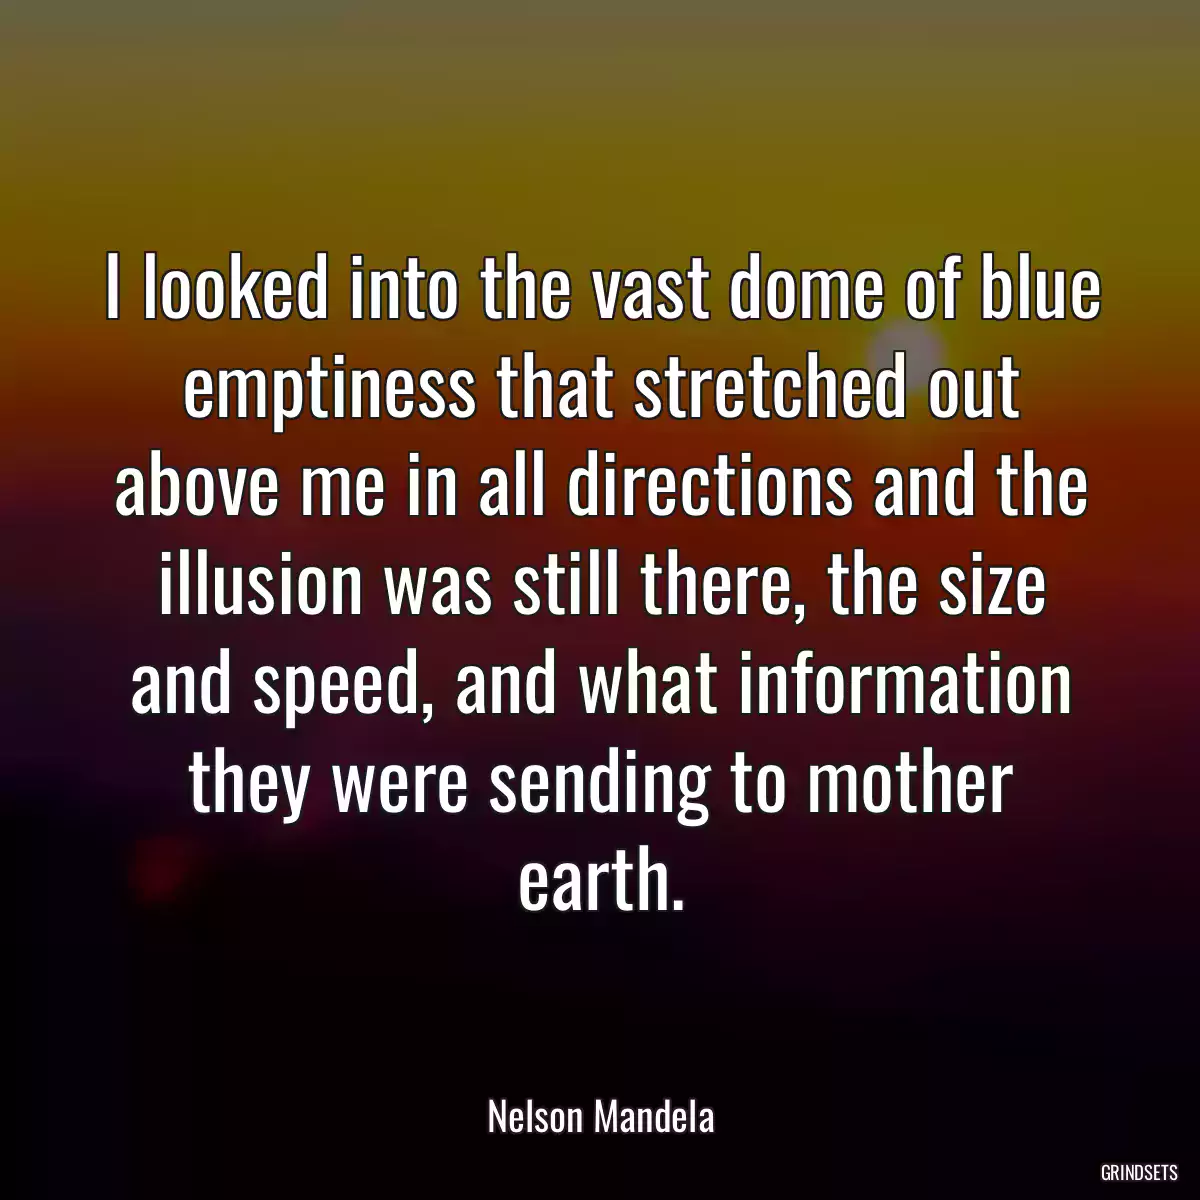 I looked into the vast dome of blue emptiness that stretched out above me in all directions and the illusion was still there, the size and speed, and what information they were sending to mother earth.